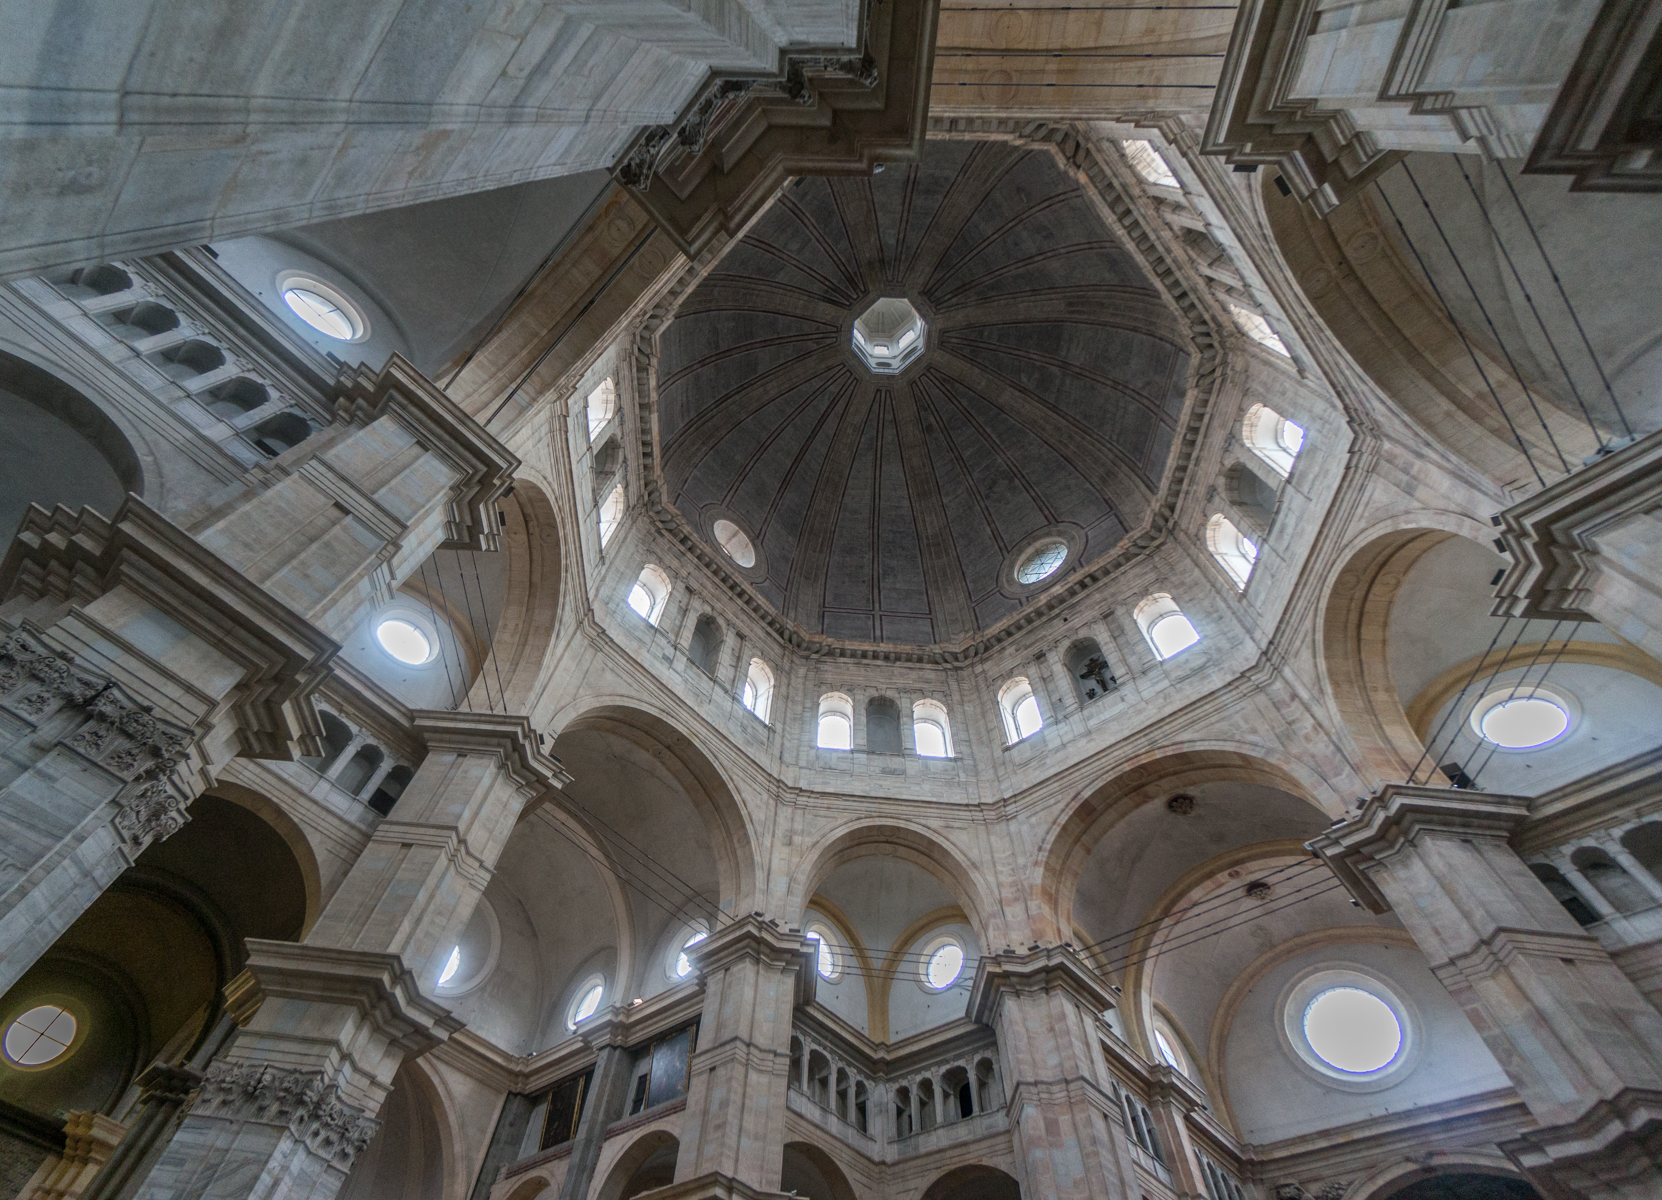 Dome interior of the Duomo di Pavia (Pavia Cathedral) | Photo by Mike Hudak